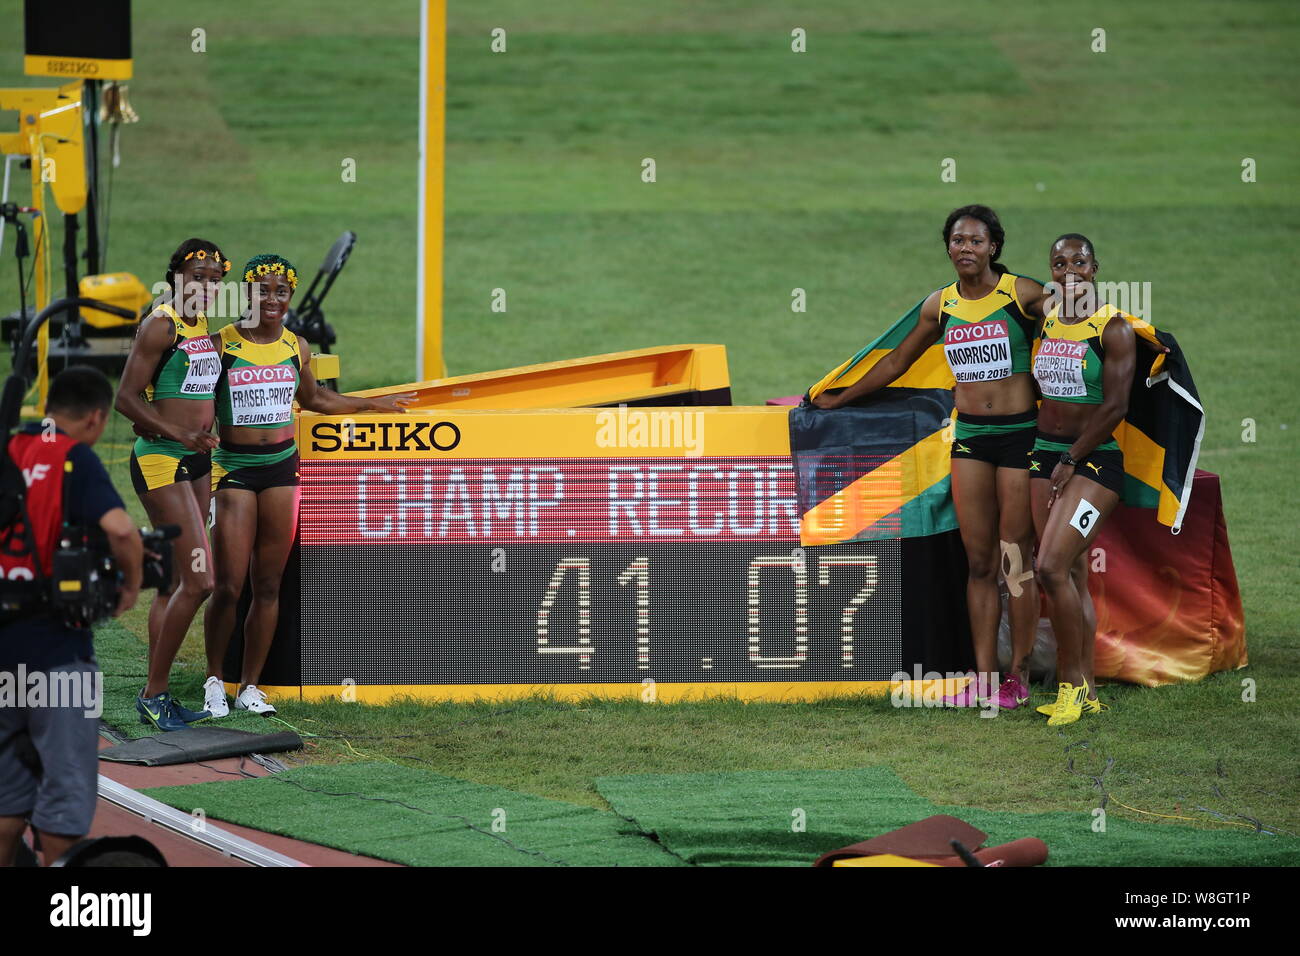 (From left) Elain Thompson, Shelly-Ann Fraser-Pryce, Natasha Morrison and Veronica Campbell-Brown pose for photos with a signboard of champion record Stock Photo